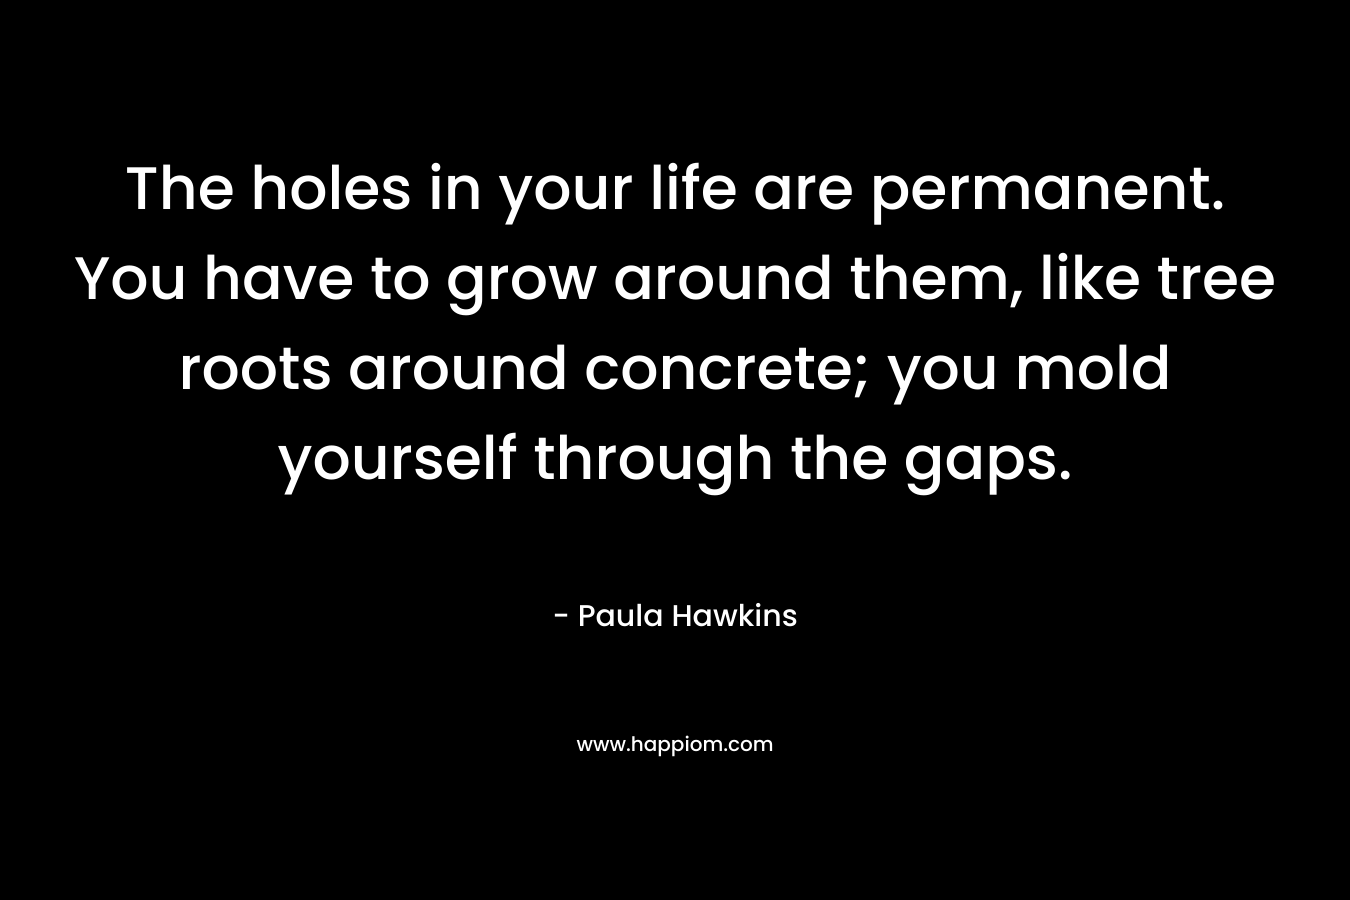 The holes in your life are permanent. You have to grow around them, like tree roots around concrete; you mold yourself through the gaps. – Paula Hawkins